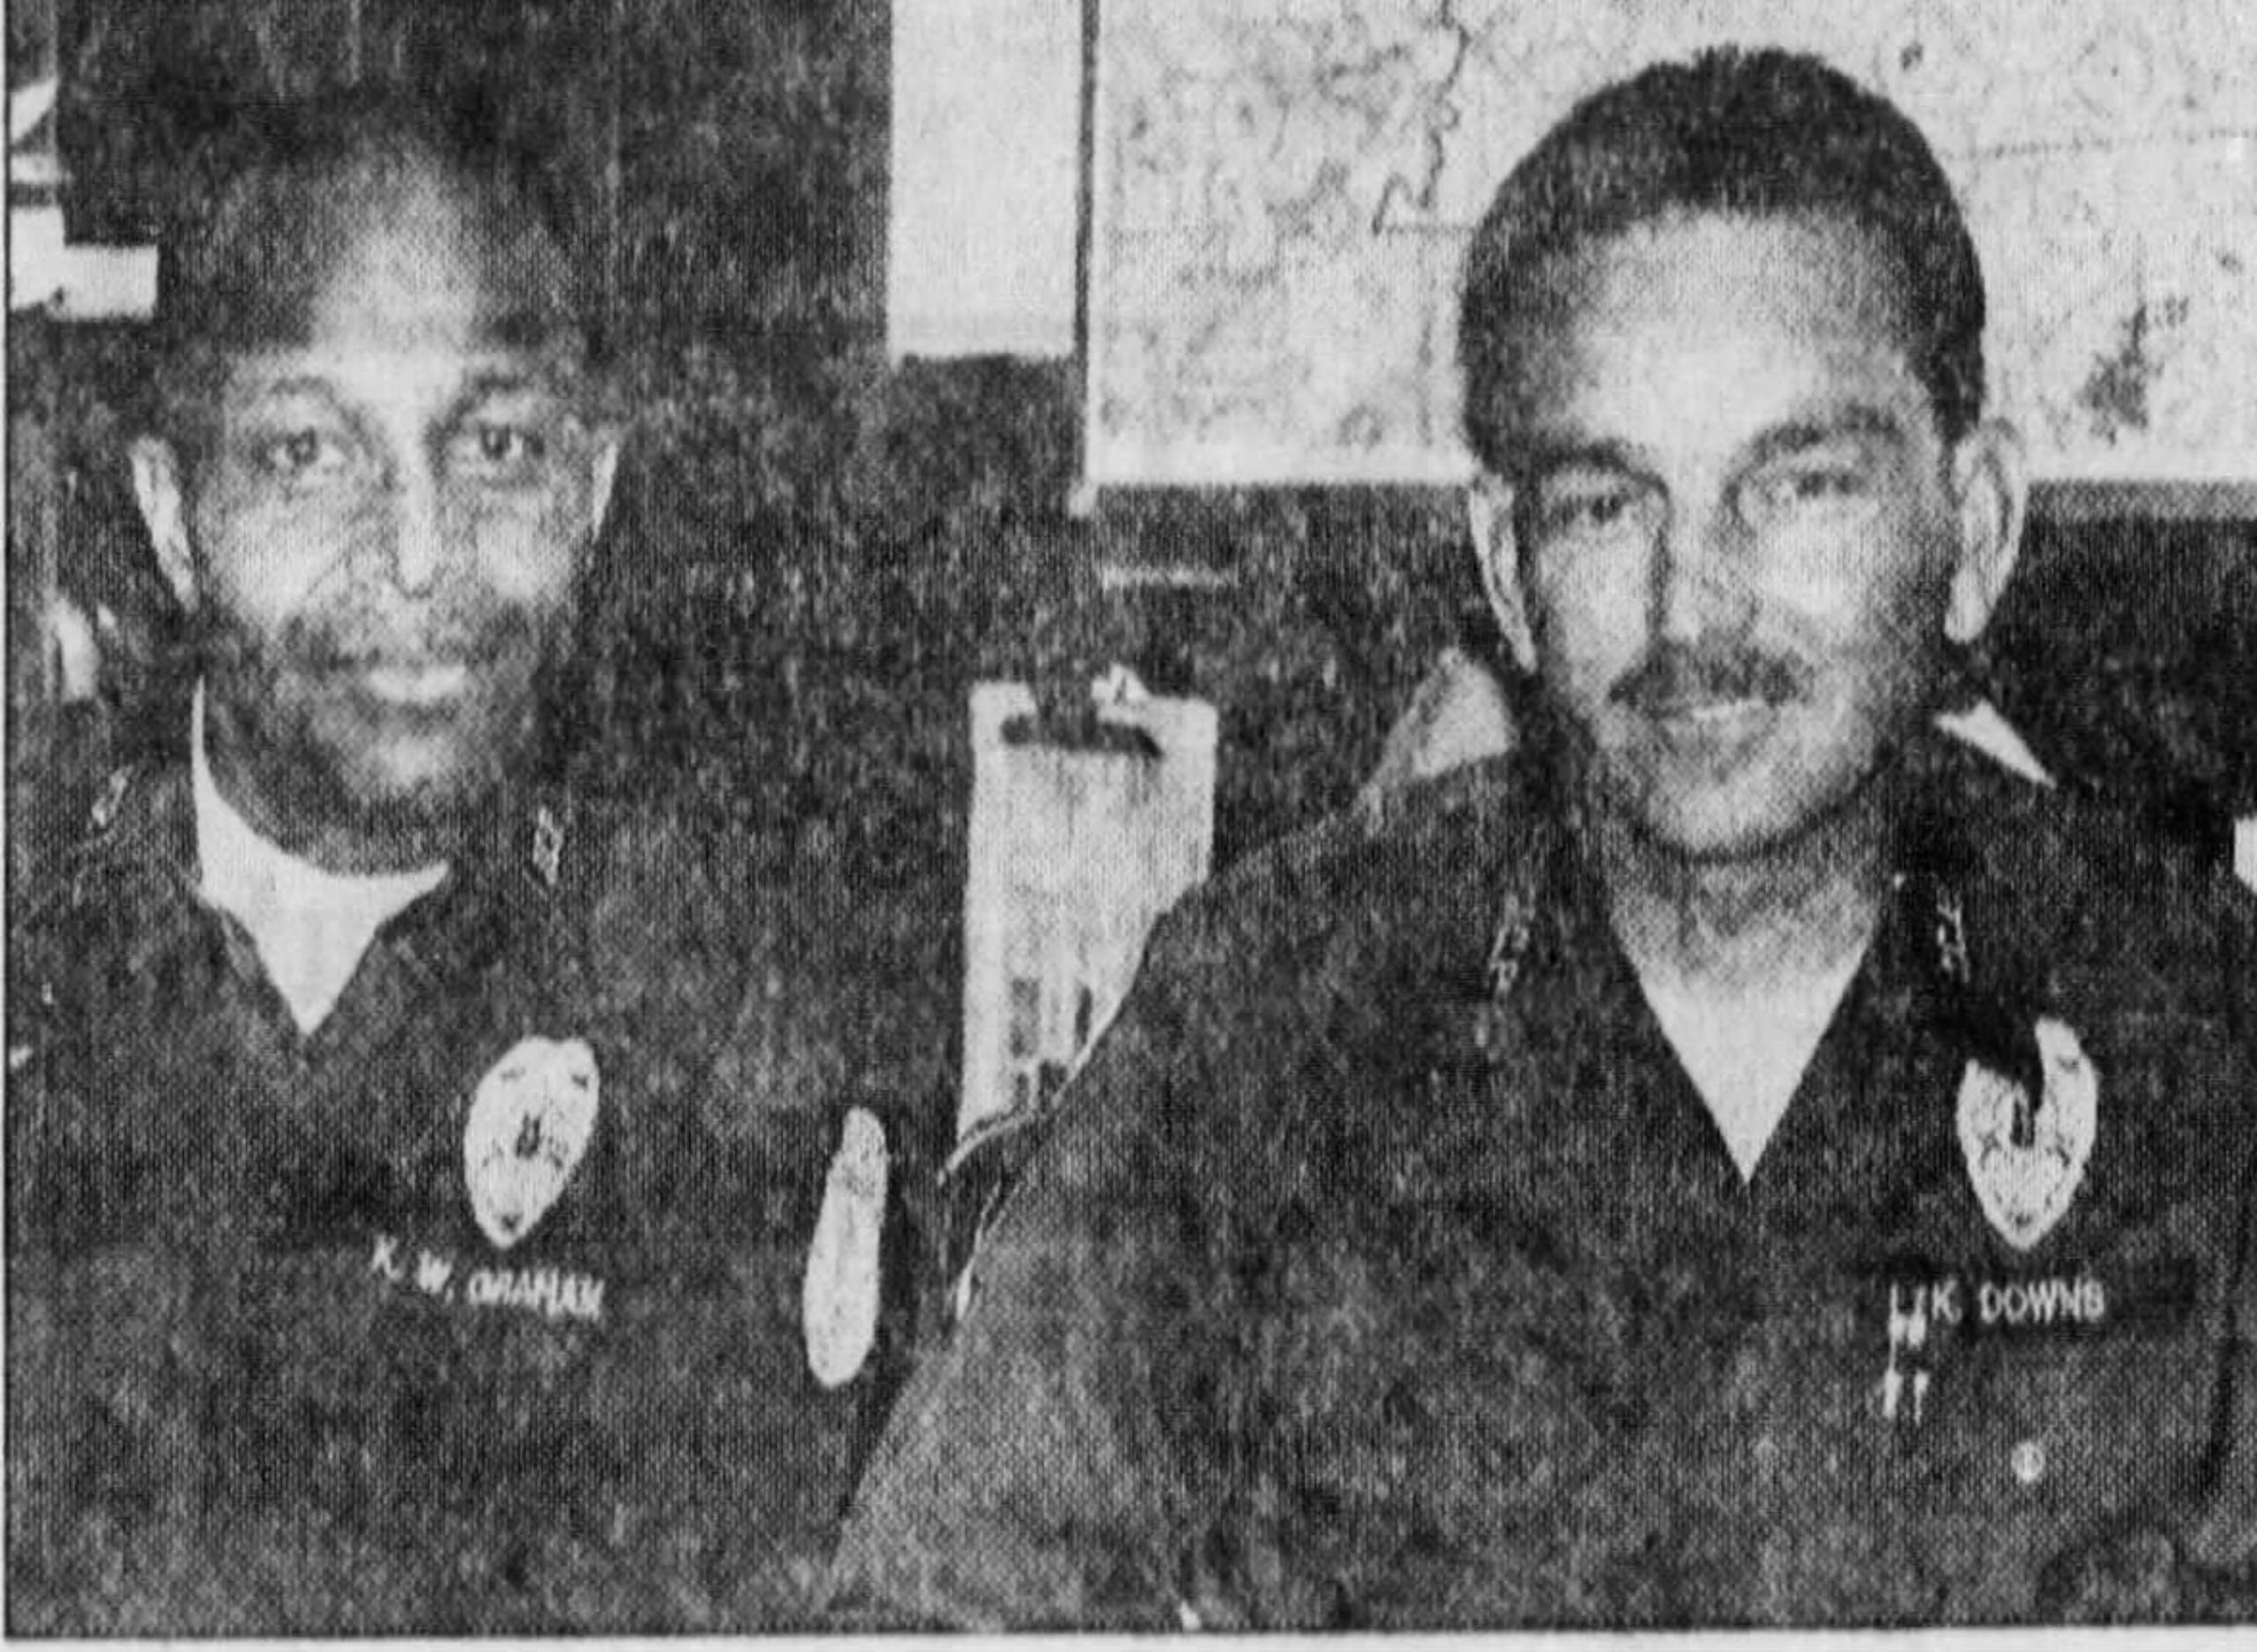 Officer Kenny Downs (right) was with pilot Kenny Graham (seated with him) when they saw the UFO. They described it as a glowing pear-shaped object about the size of a basketball that at one point shot three baseball-size fireballs out of its middle.